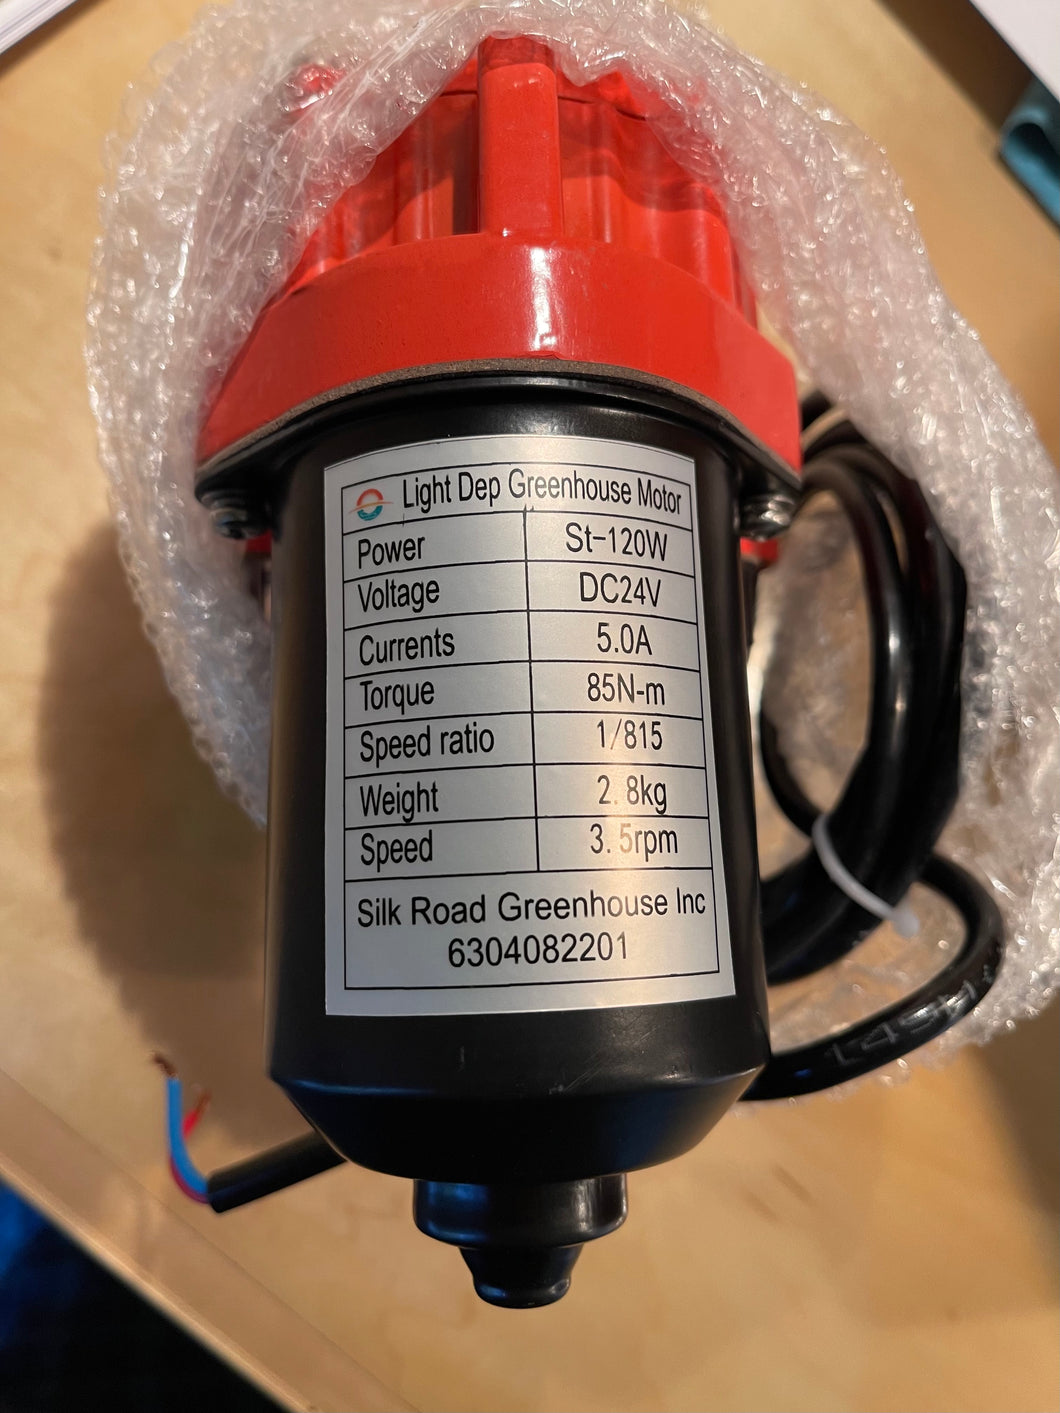 Light dep Greenhouse Electric Motor with Large Diameter 1.38” OD roll bar Adaptor, Connector. Adaptor Couples Motor Shaft to 1.38” OD roll bar Pipe